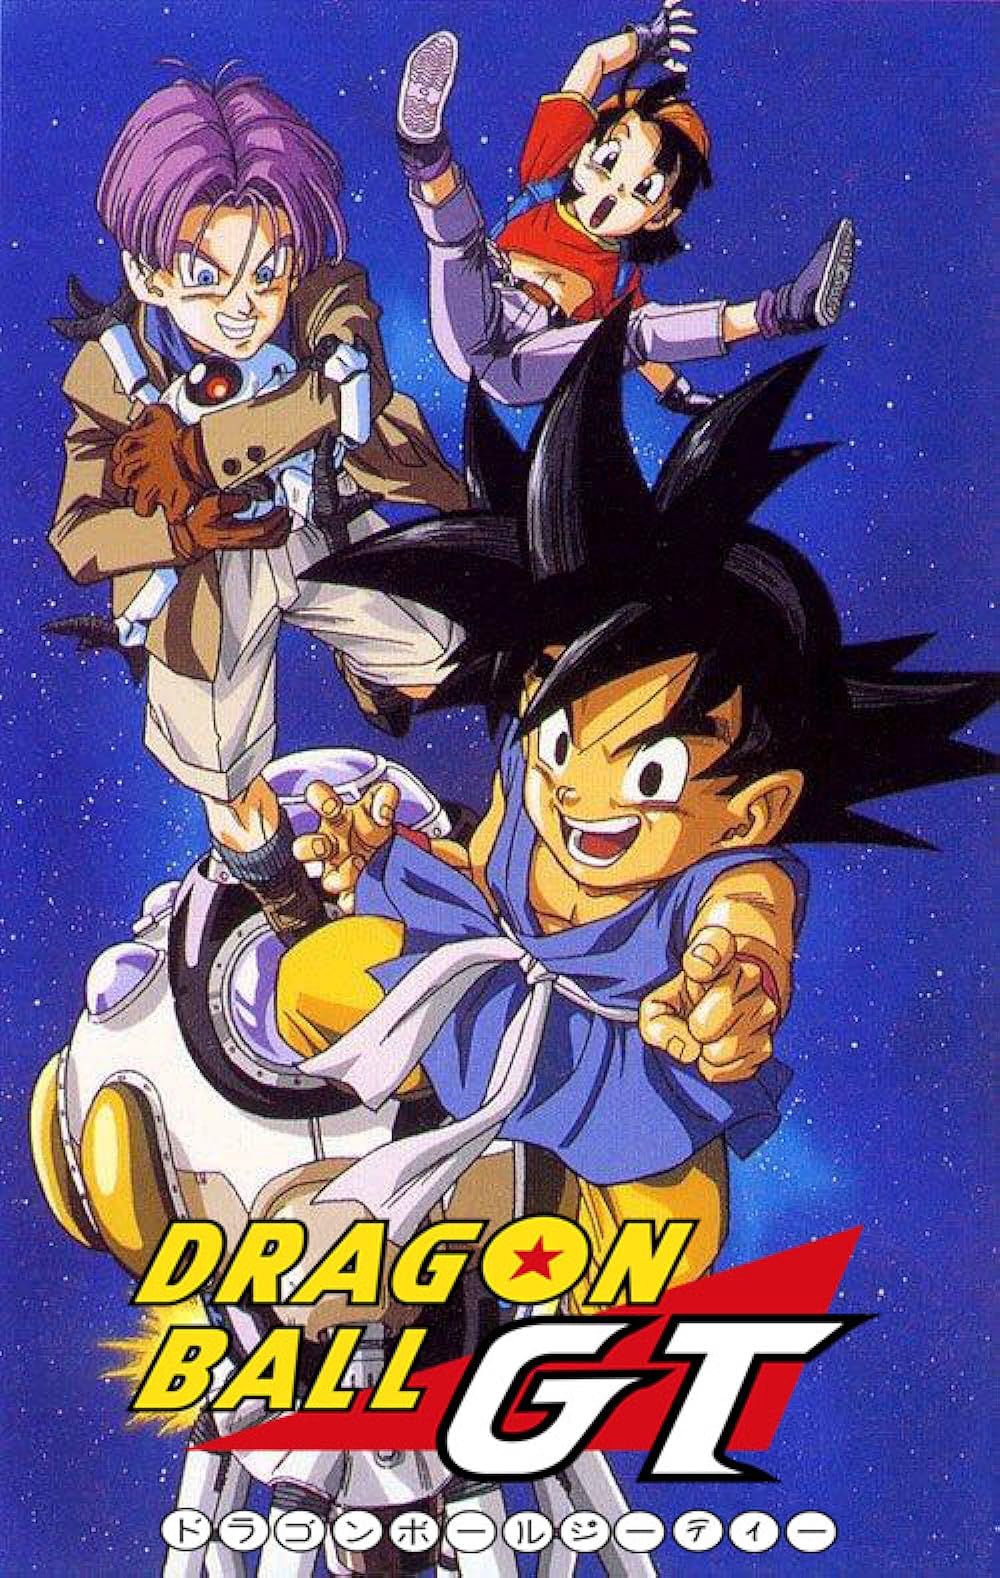 Goku and friends leaping in the Dragon Ball GT poster